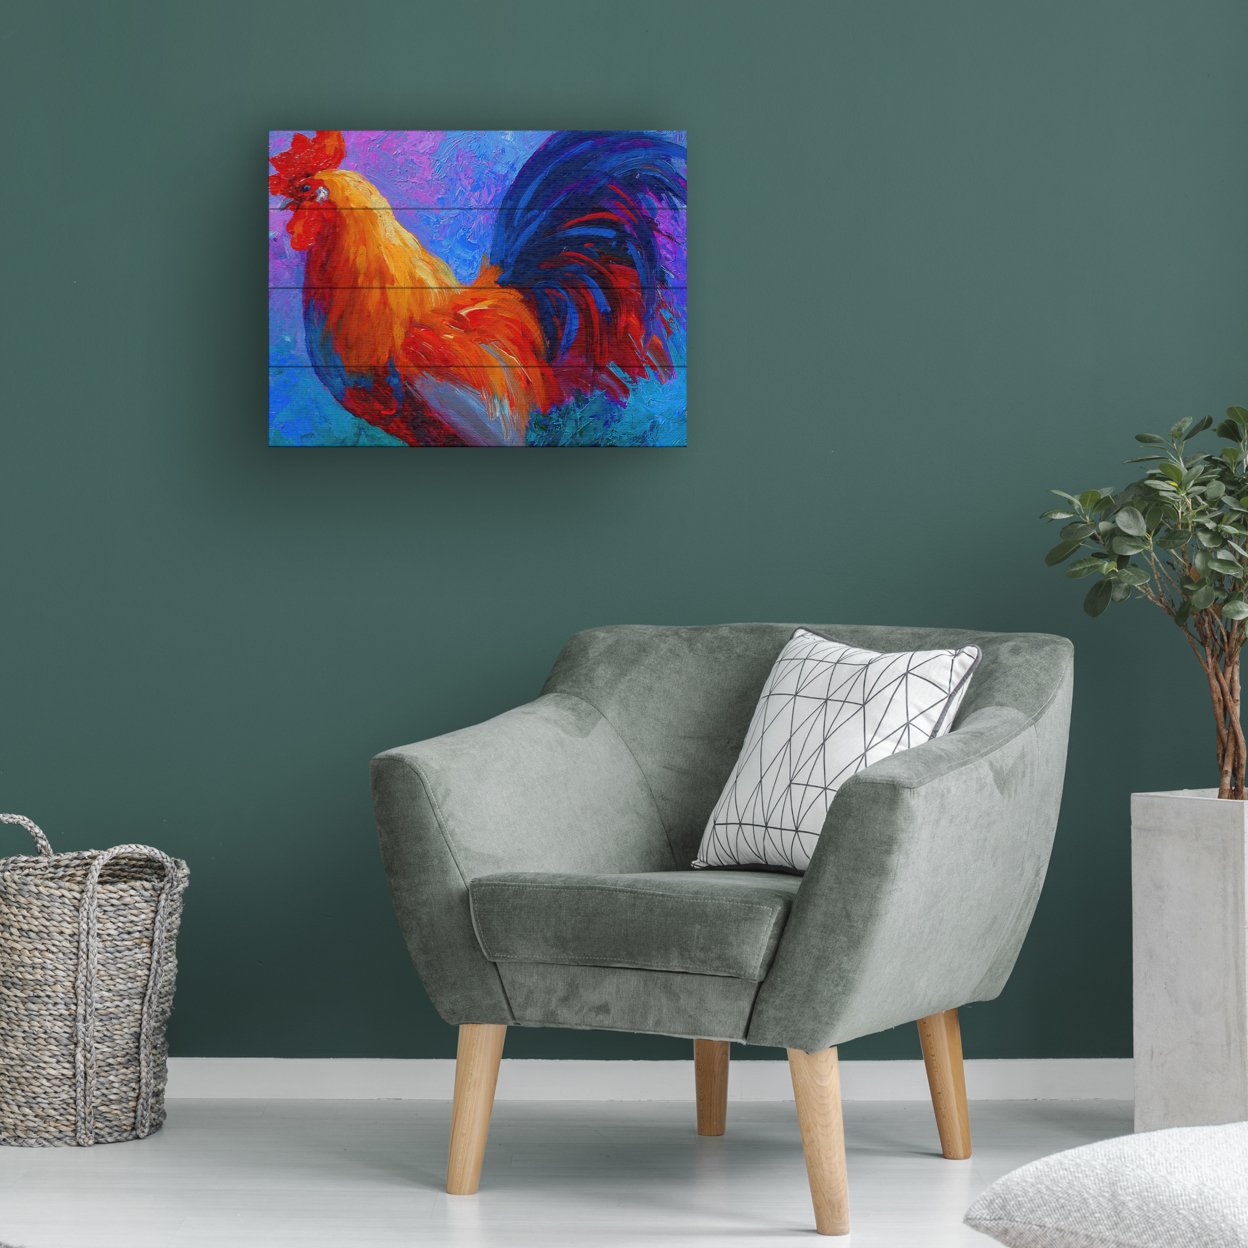 Wall Art 12 X 16 Inches Titled Rooster Bob 1 Ready To Hang Printed On Wooden Planks